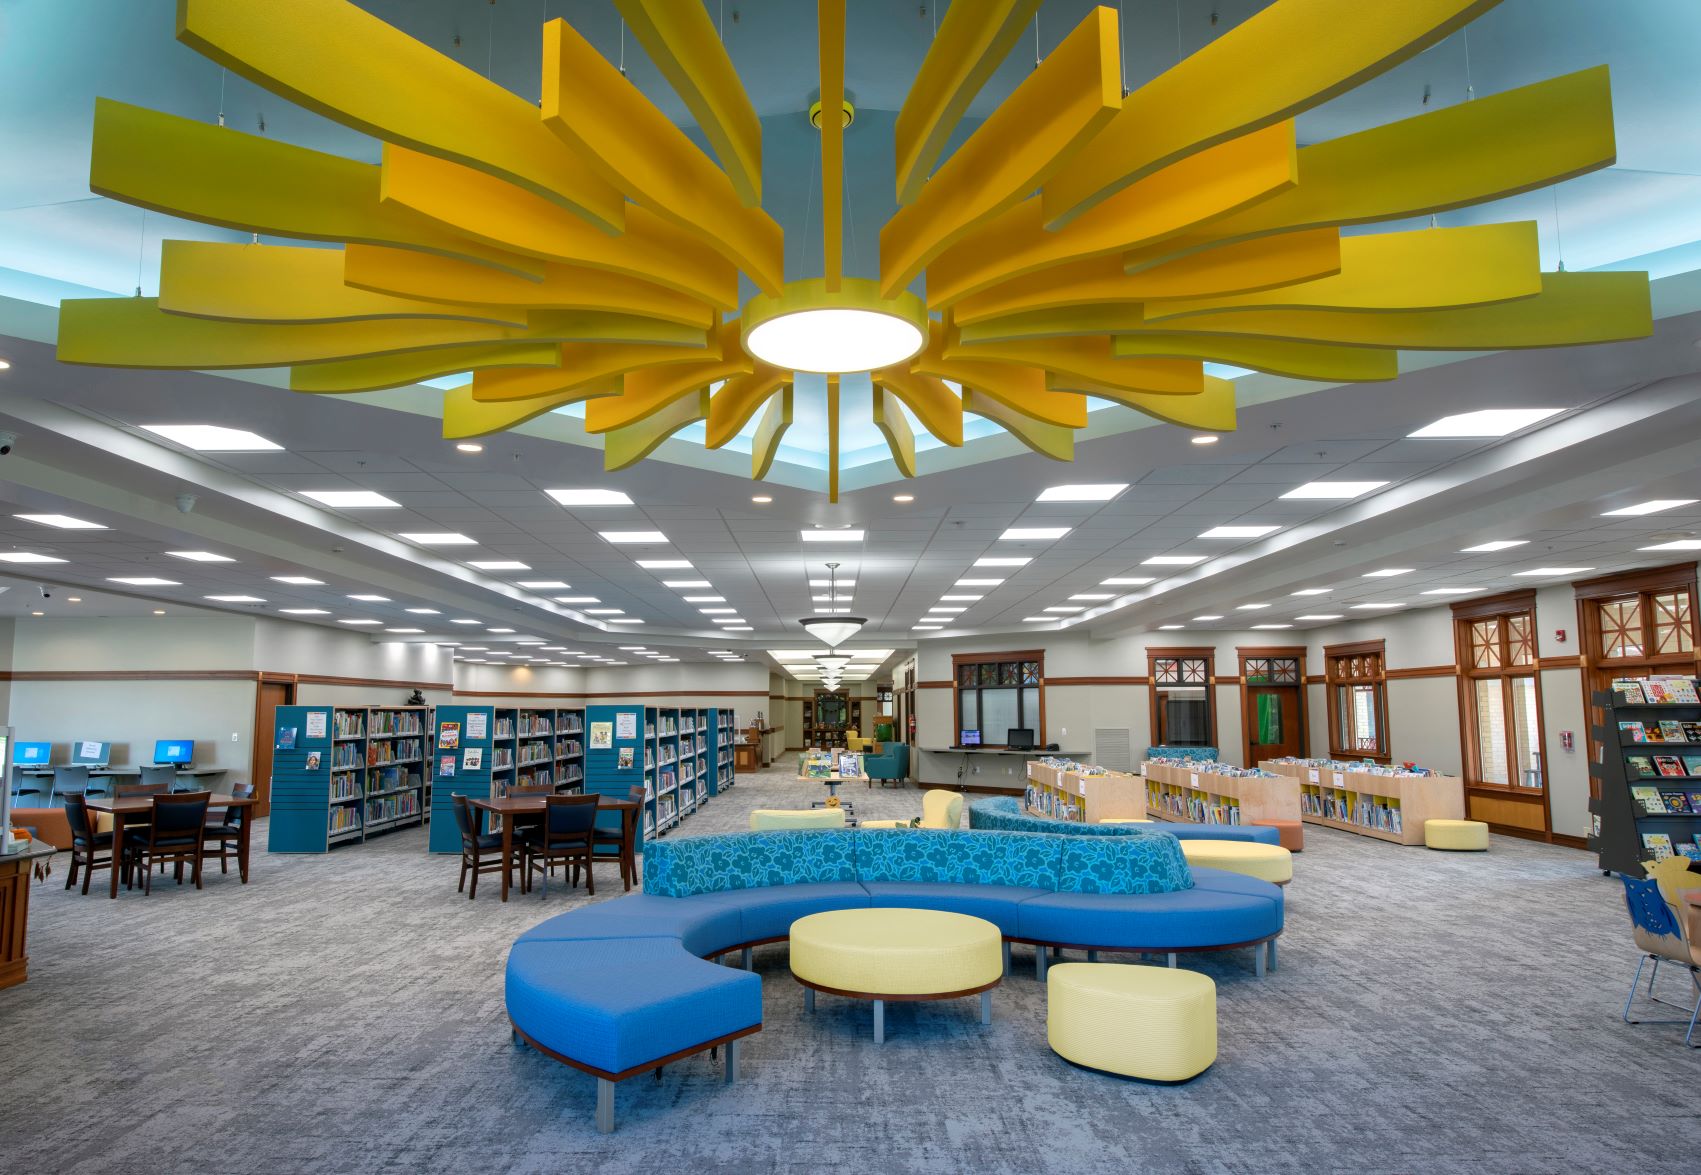 New Carlisle-Olive Township Public Library with Ceiling Detail 1